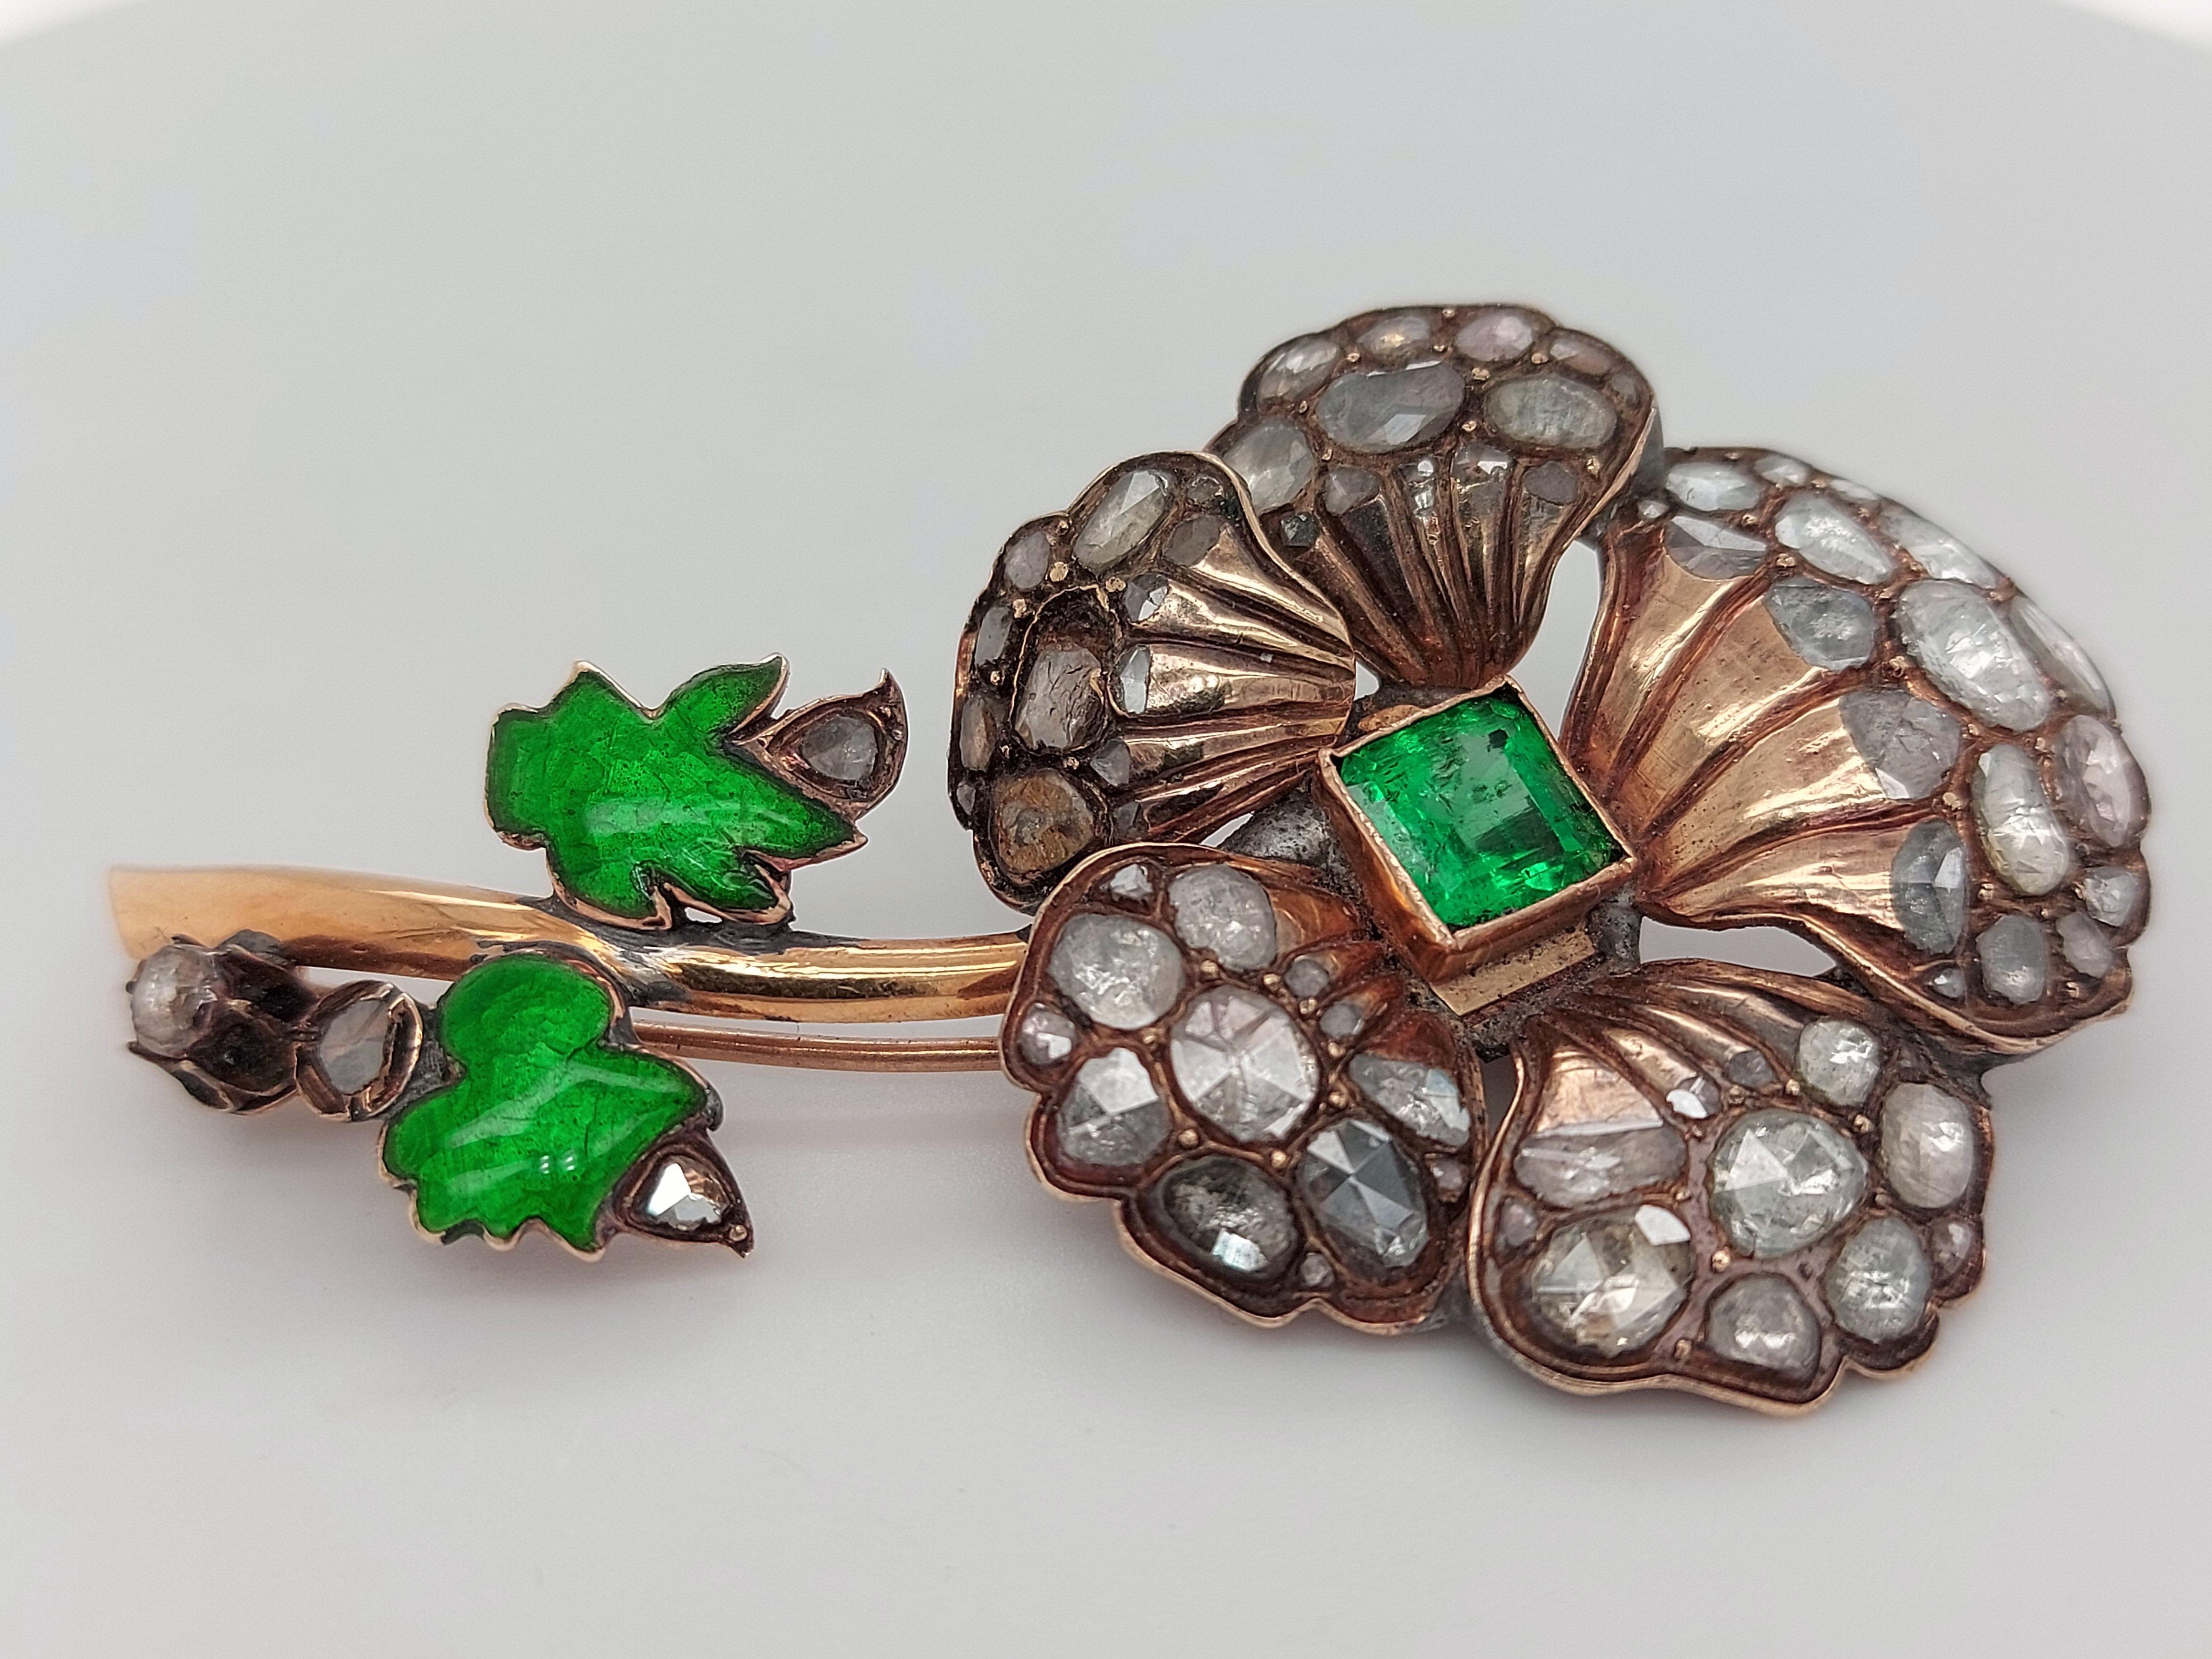 Silver and 14kt Gold Flower Brooch, Rose Cut Diamonds, Colombia Emerald, Enamel For Sale 1